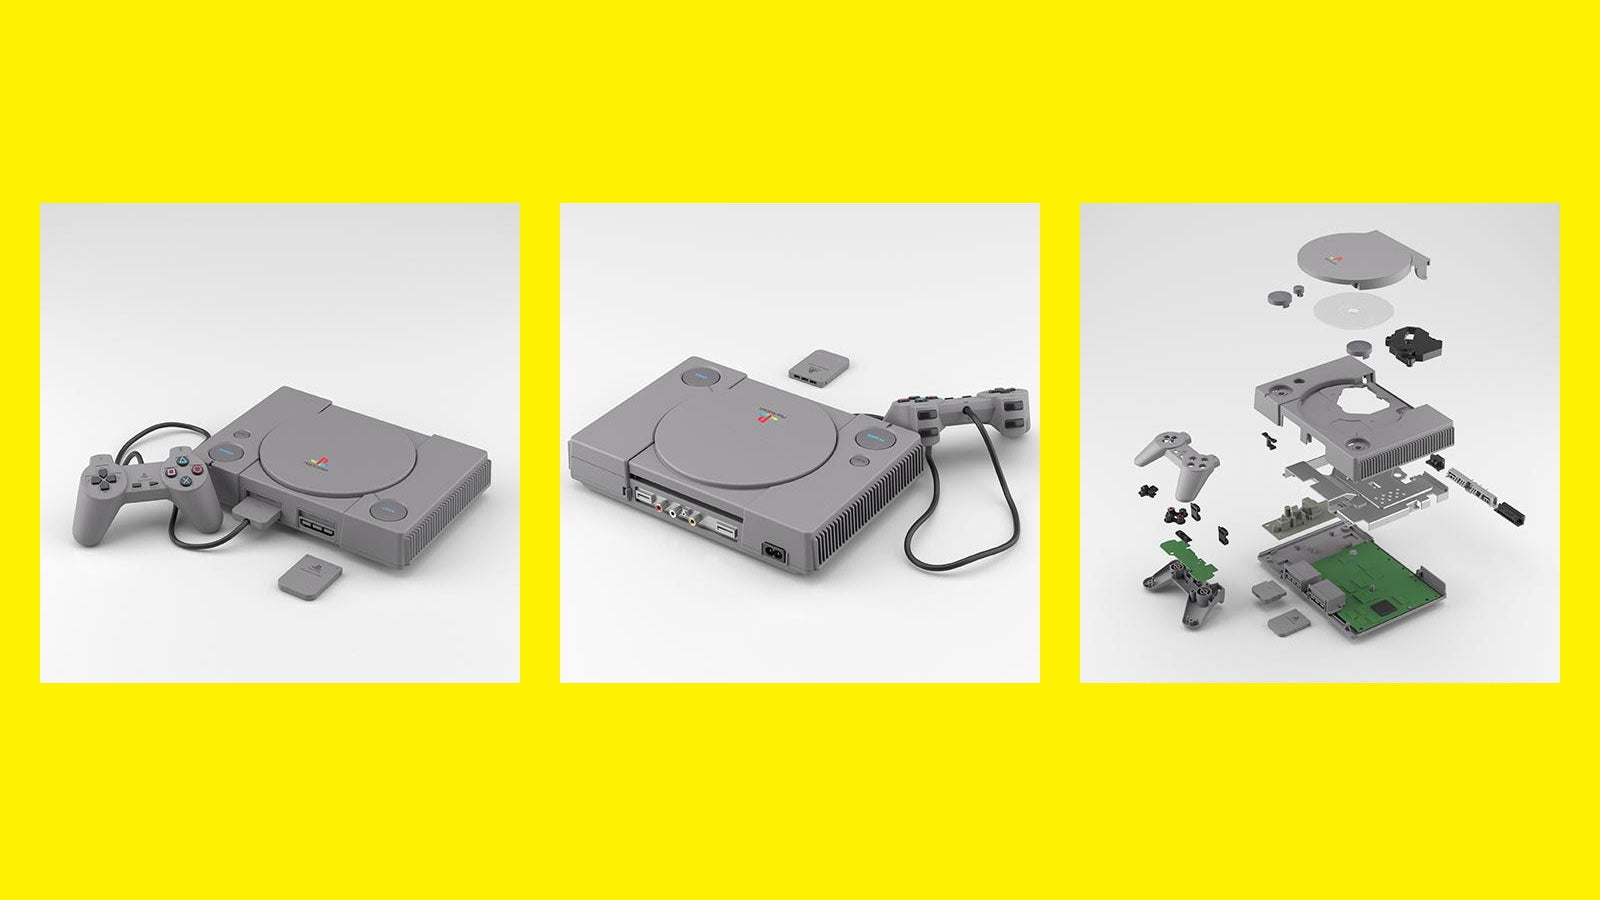 Tiny PlayStation Toy Even Has The Internal Circuitry